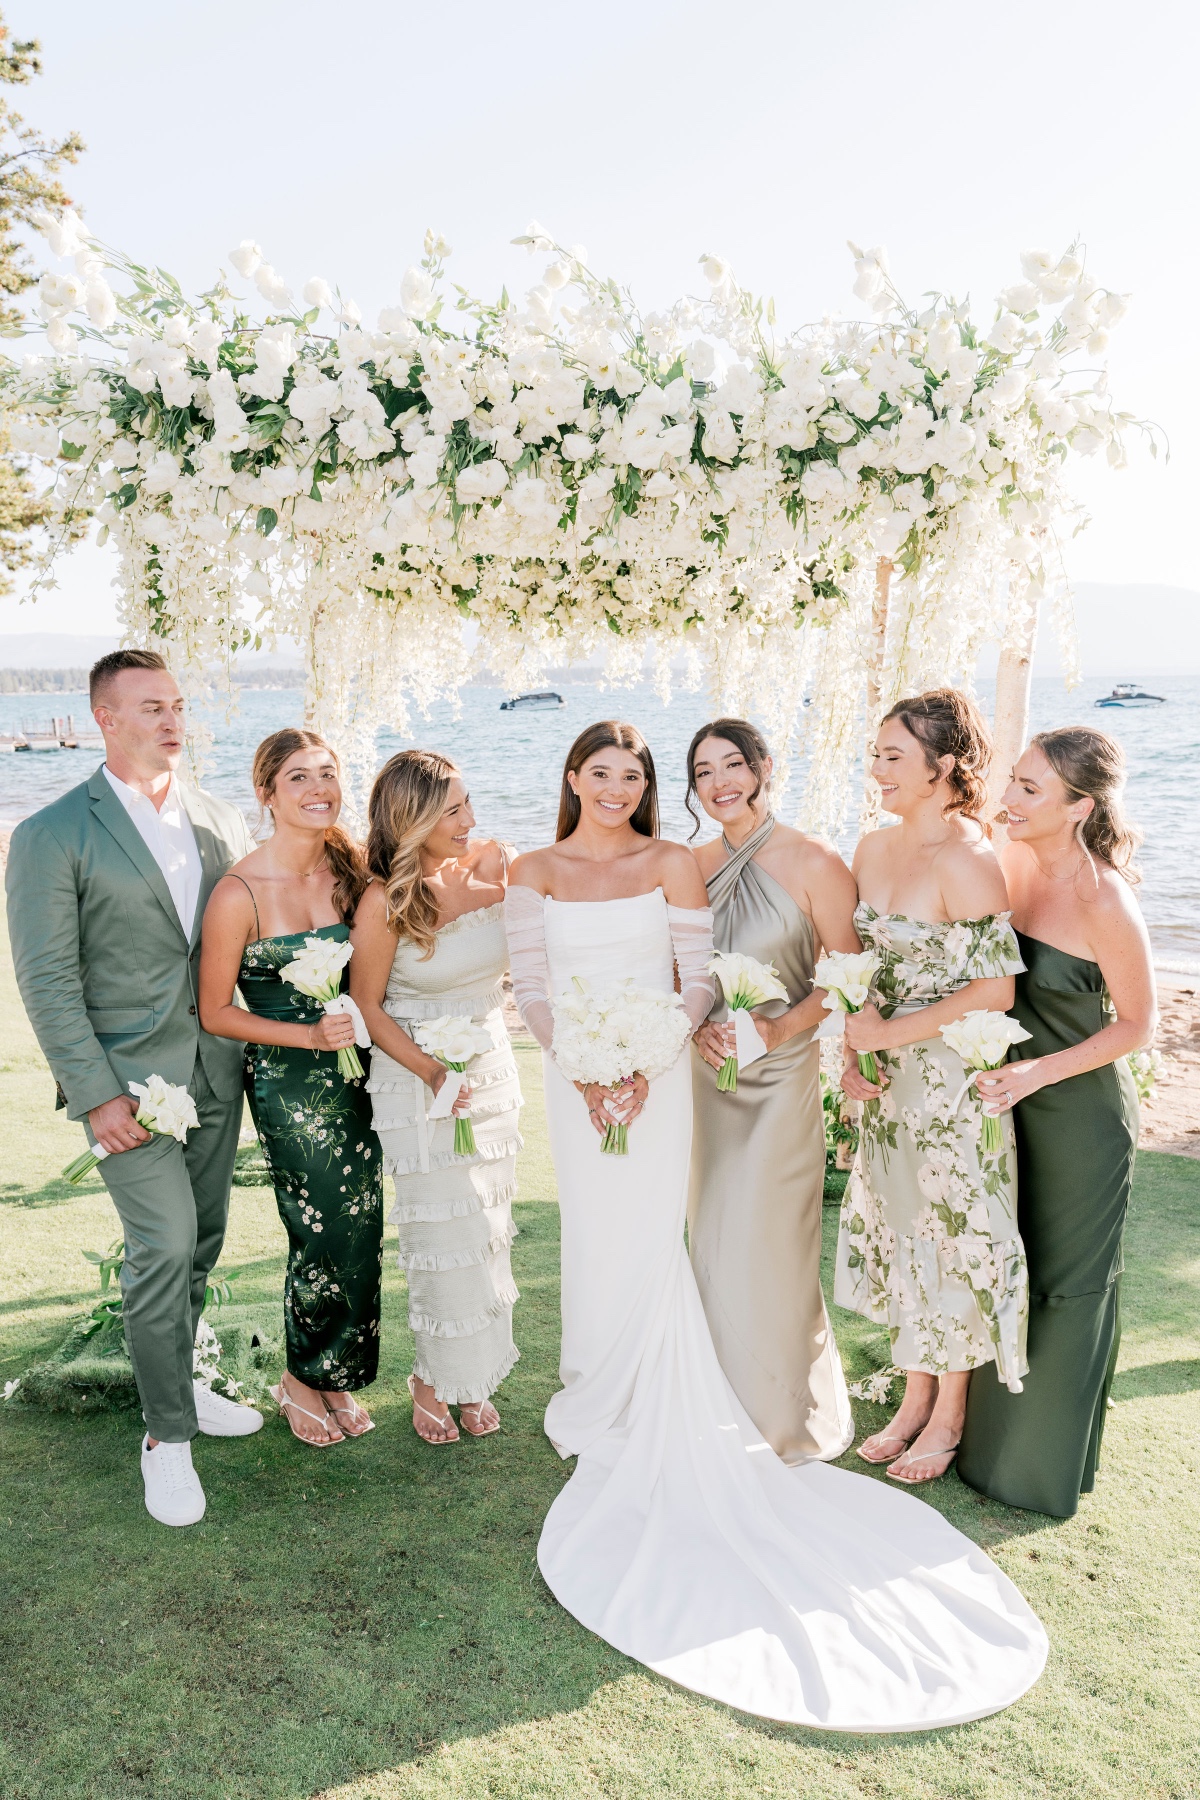 Mismatched green bridal party